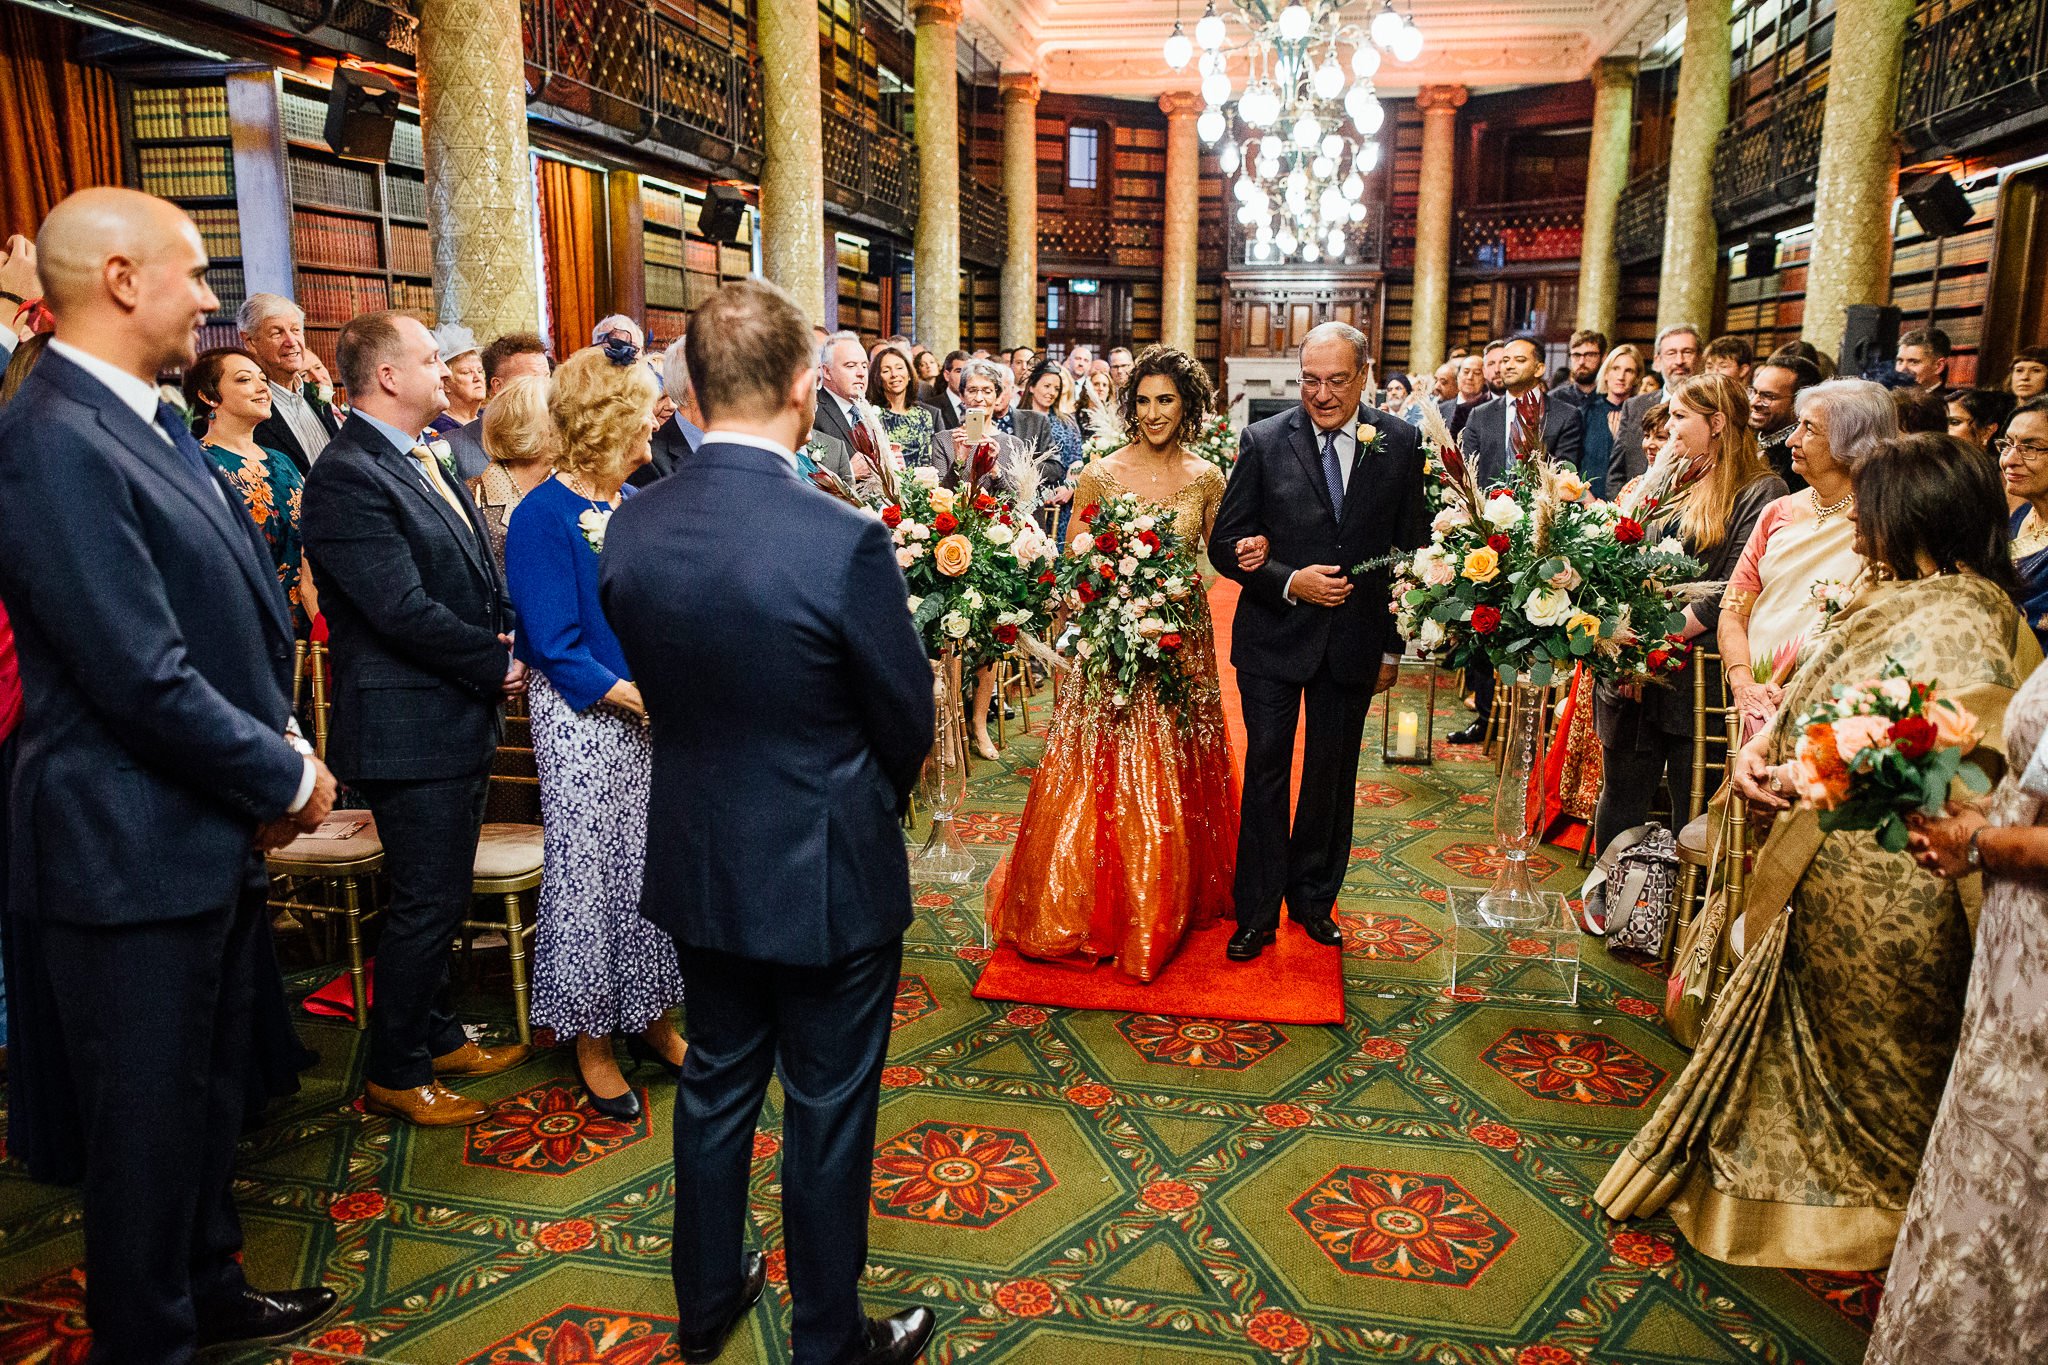  Bride in the library room during the wedding ceremony at One Whitehall Place London 